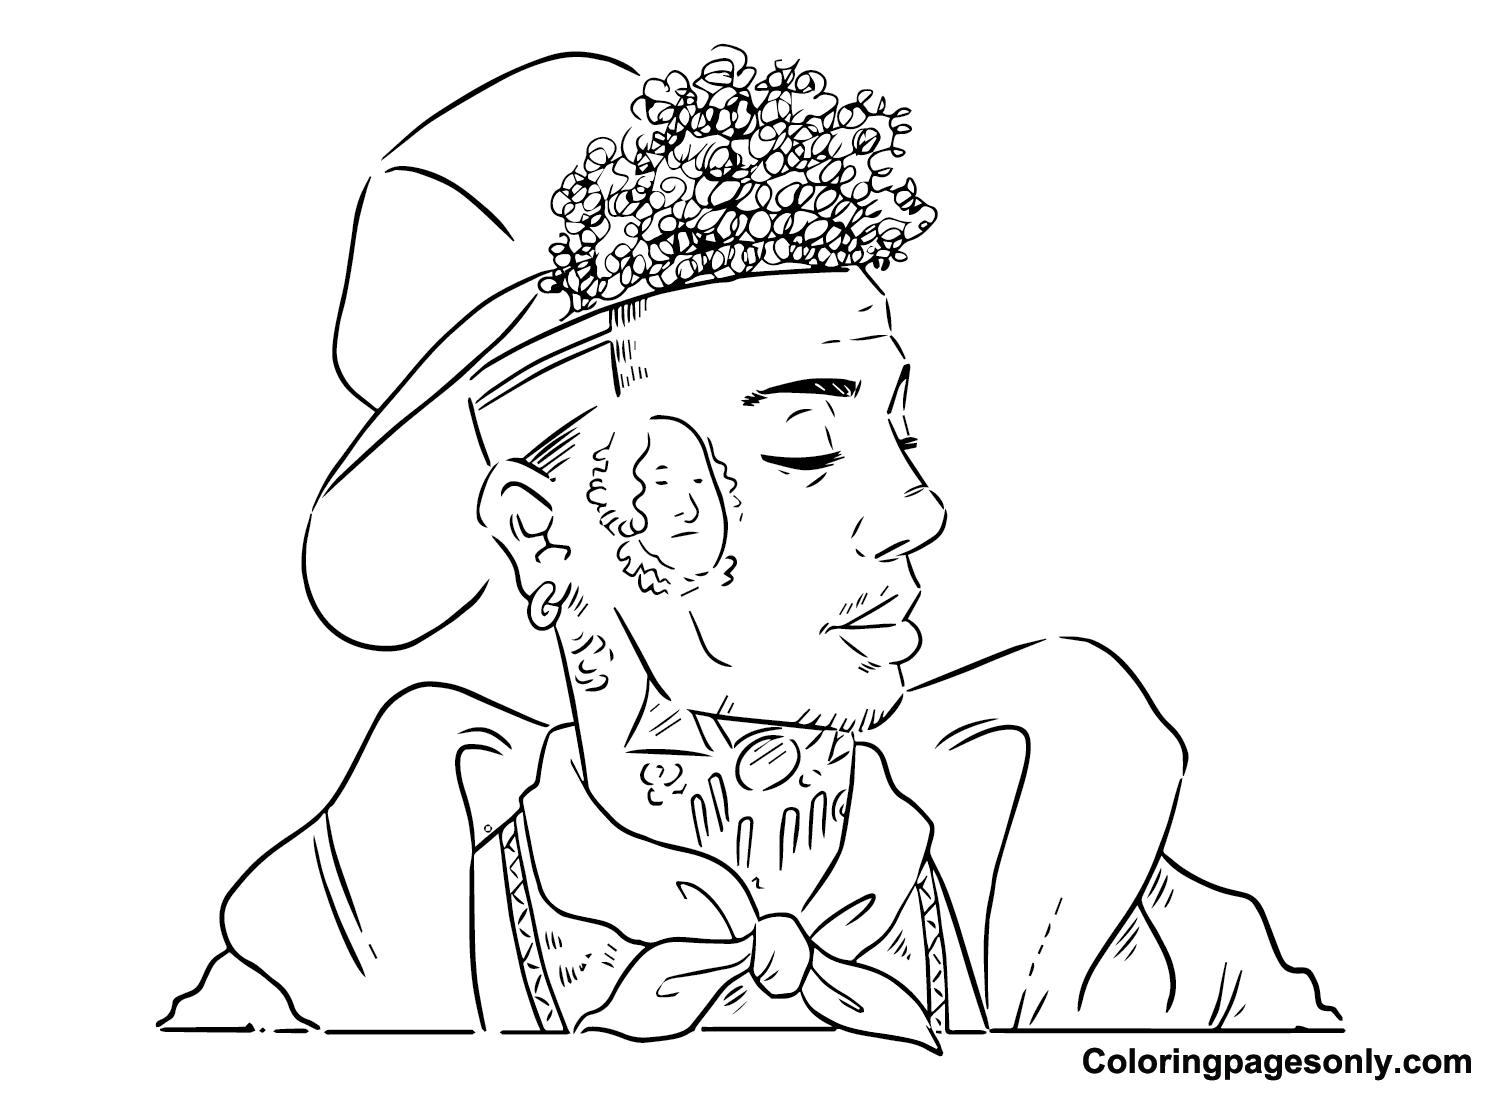 Amazing Blueface Coloring Pages